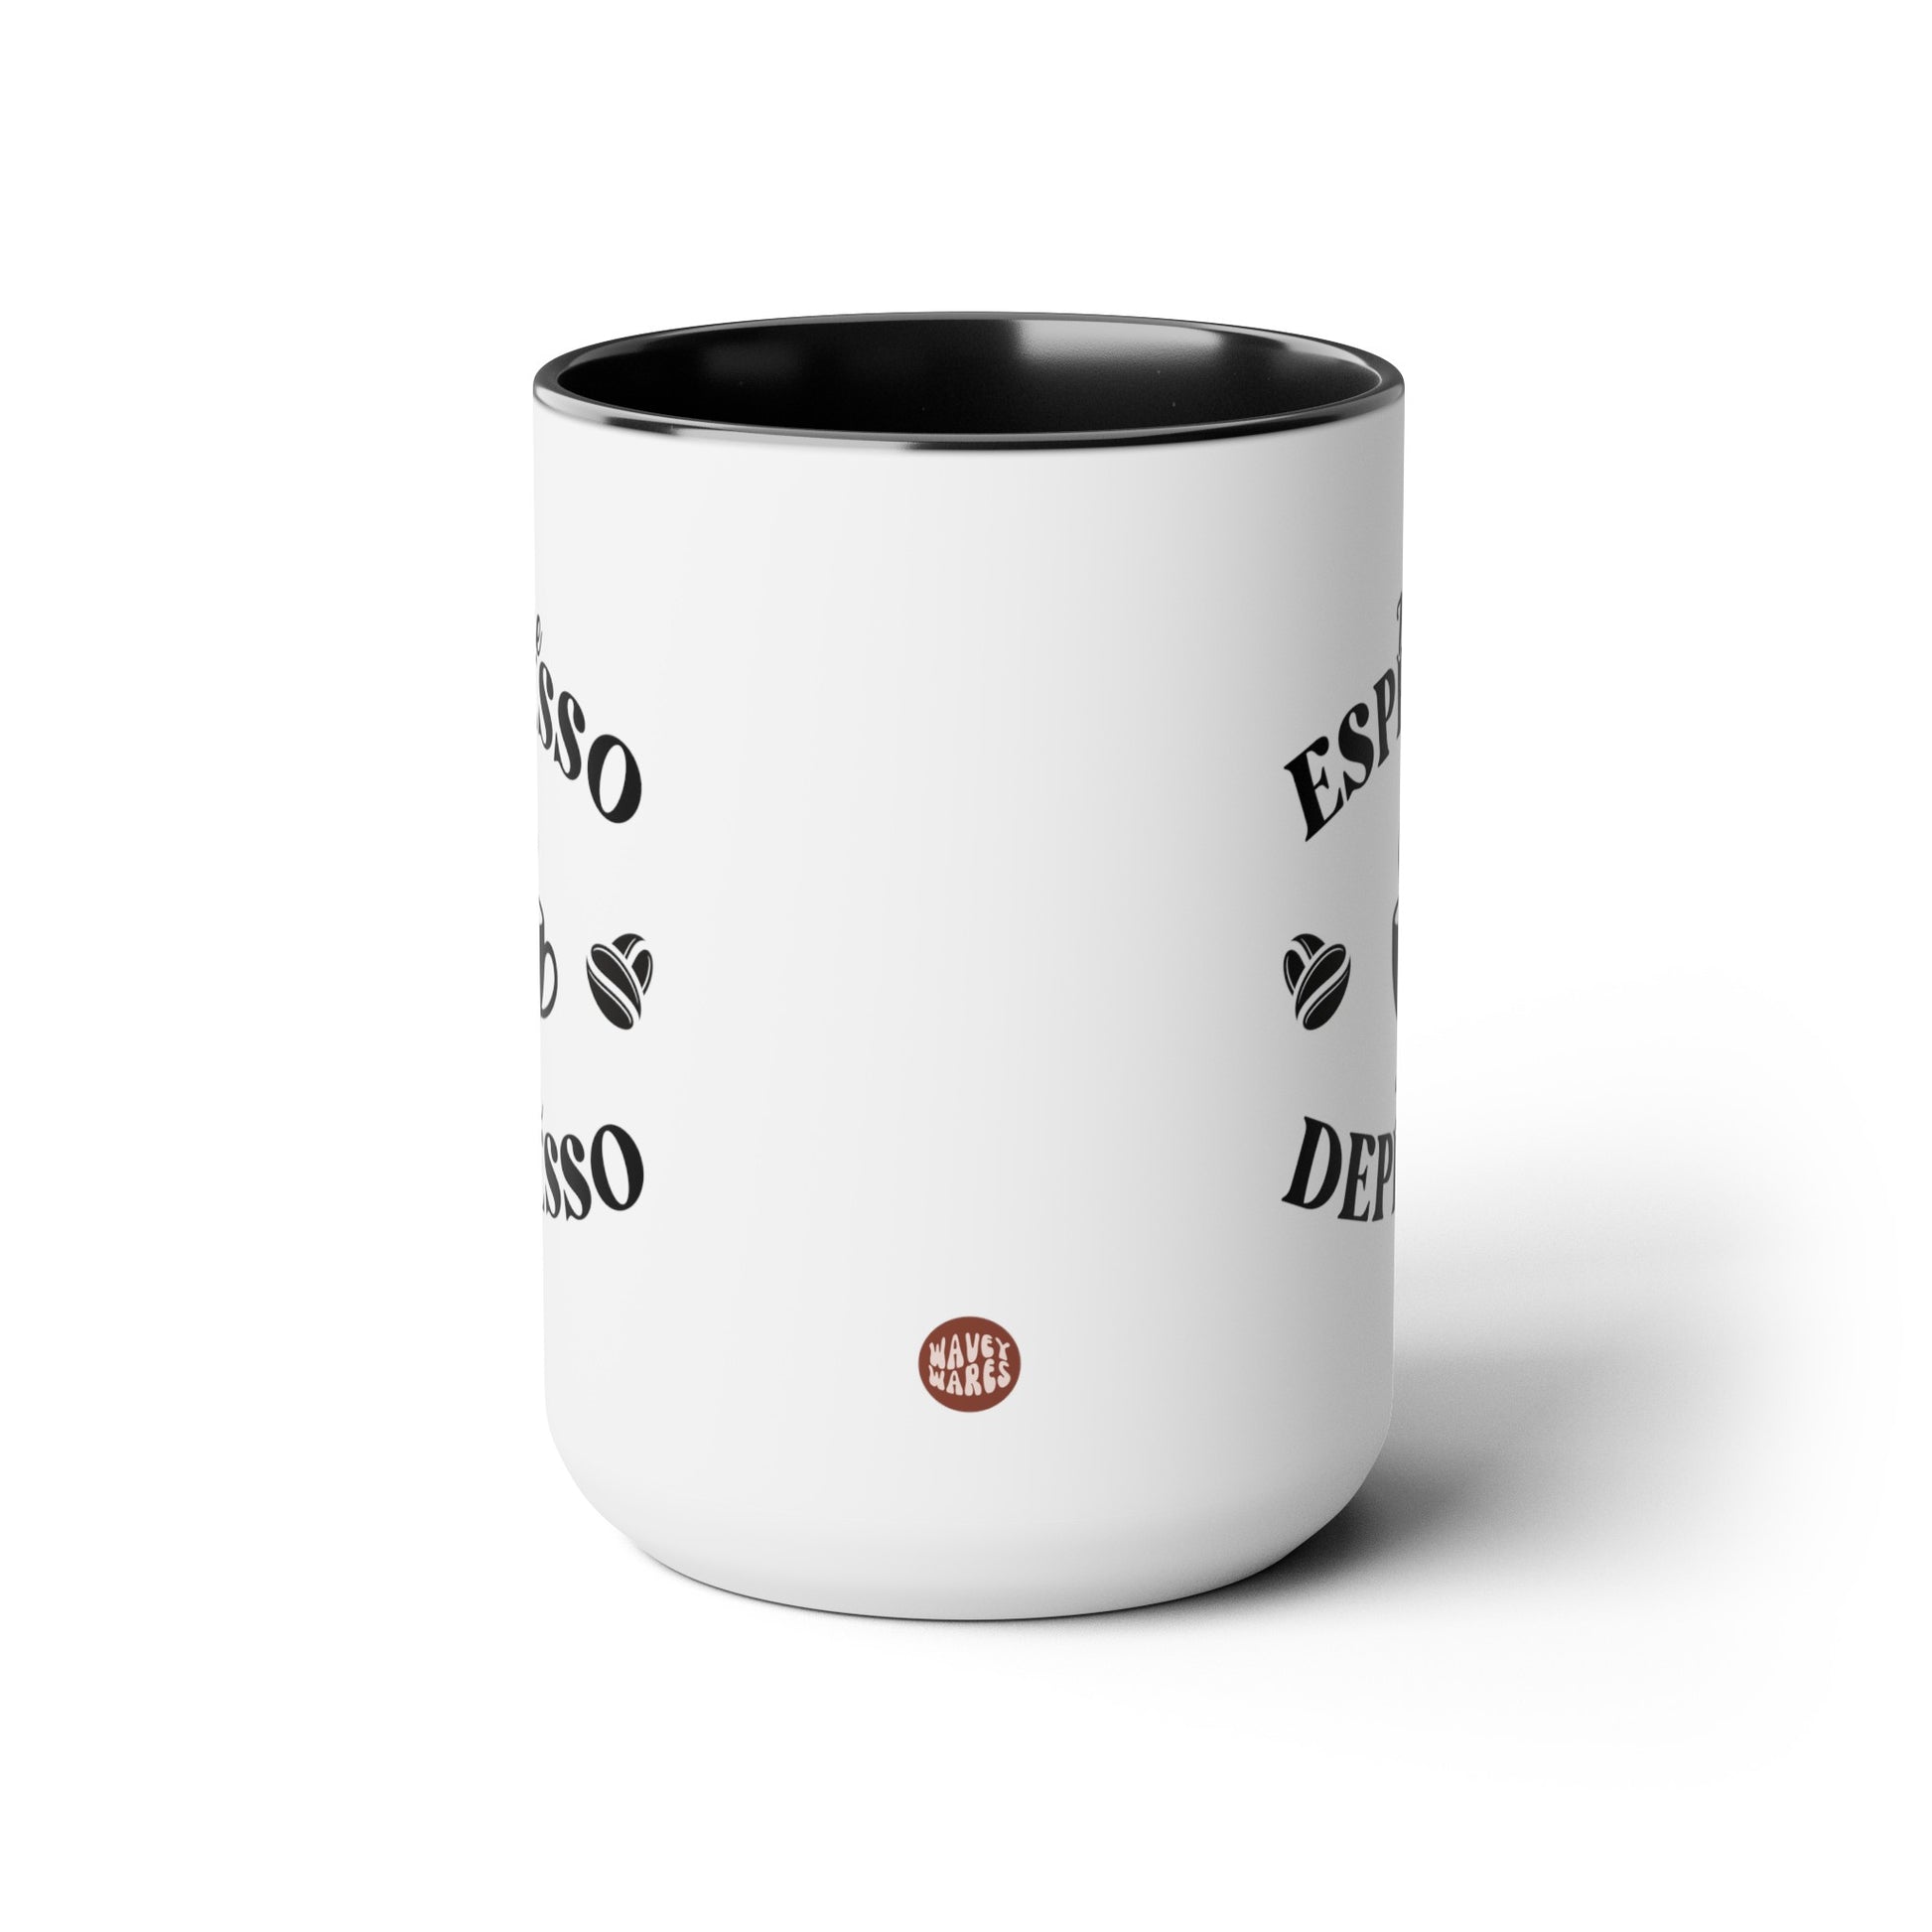 More Espresso Less Depresso 15oz white with black accent funny large coffee mug gift for caffeine lover sayings quotes retro bartender barista waveywares wavey wares wavywares wavy wares side